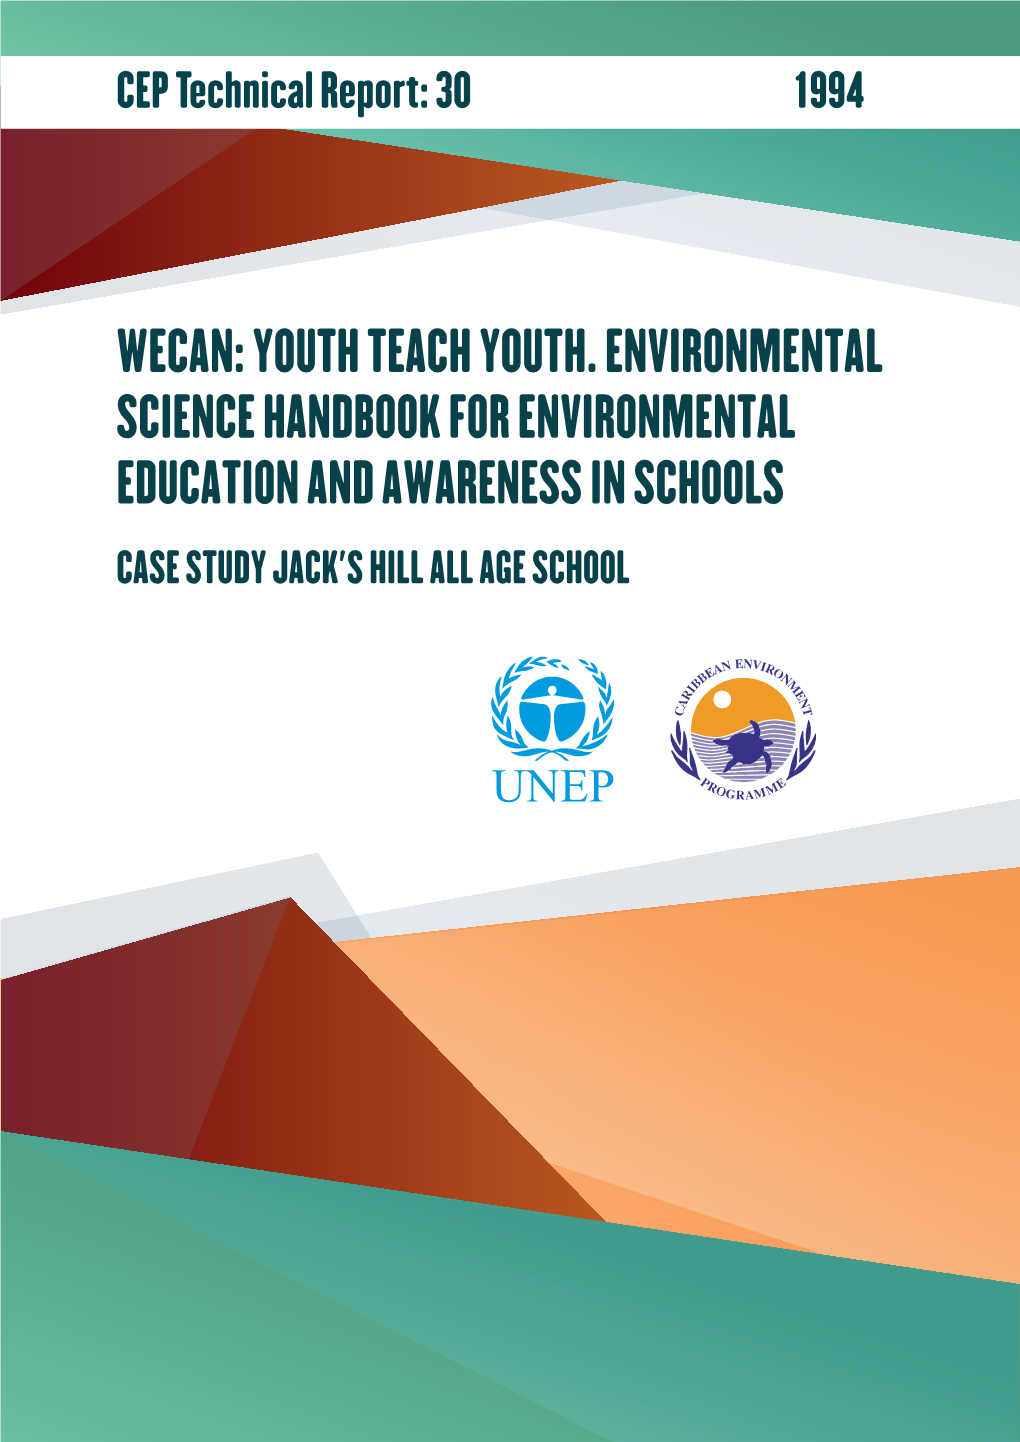 WECAN: YOUTH TEACH YOUTH. ENVIRONMENTAL SCIENCE HANDBOOK for ENVIRONMENTAL EDUCATION and AWARENESS in SCHOOLS CASE STUDY JACK's HILL ALL AGE SCHOOL Table of Contents